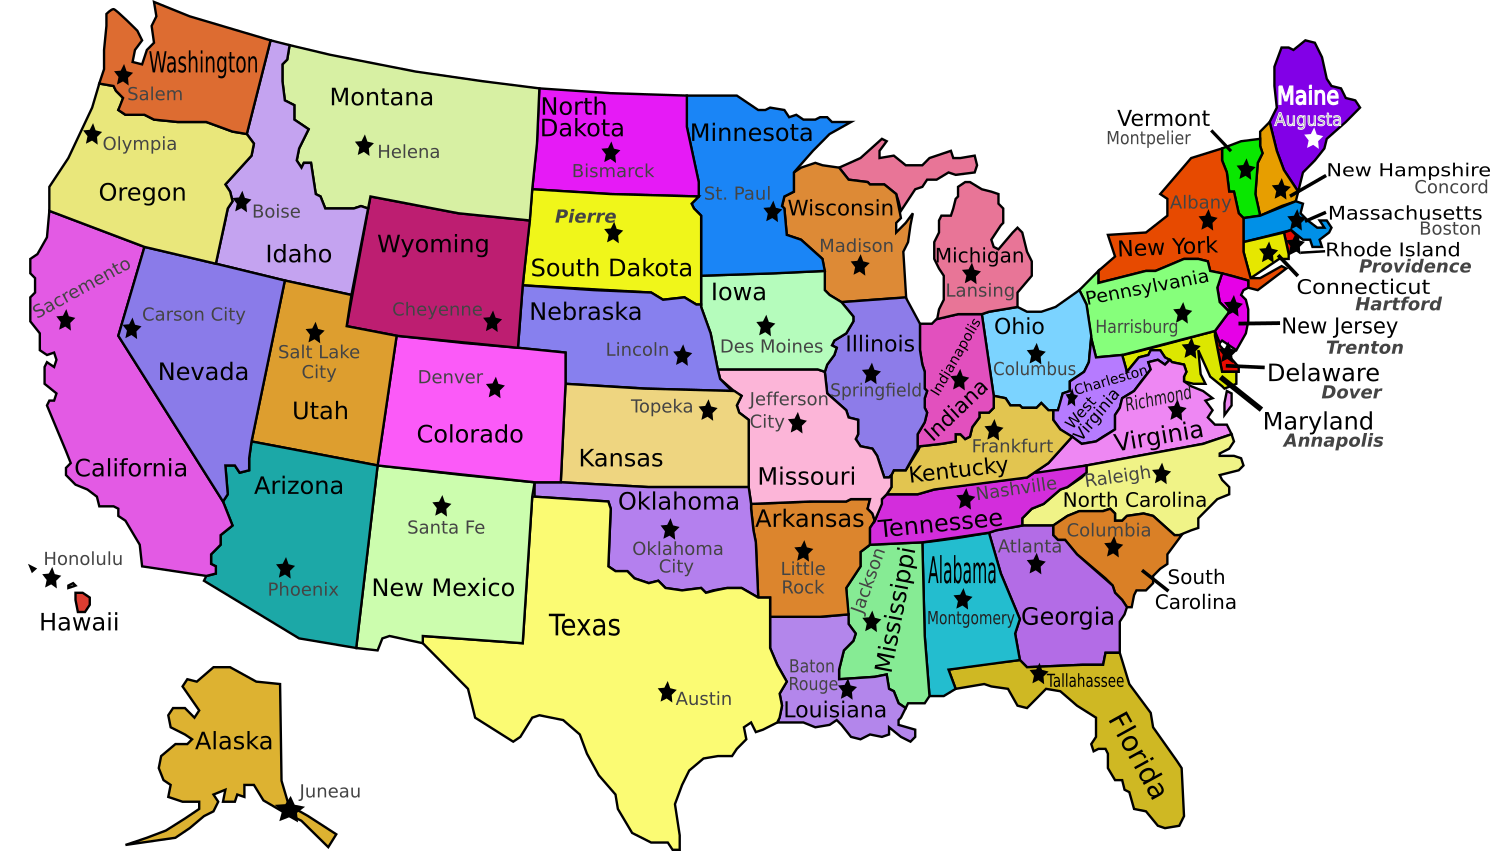 Free Printable Labeled Map Of The United States